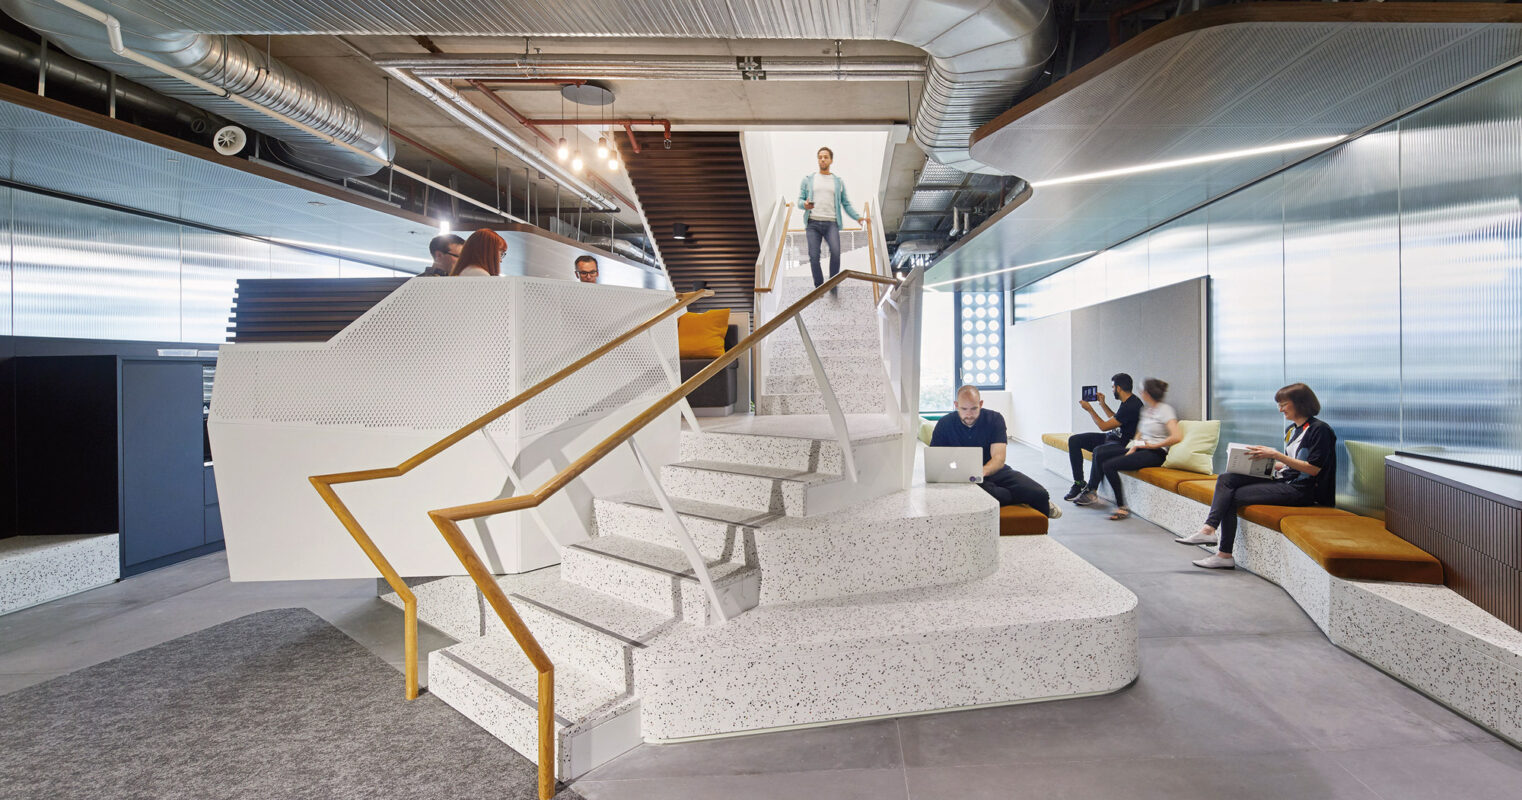 Modern office interior featuring a central floating staircase with white steps and gold accents. The surrounding open-concept space includes a lounge area with mustard yellow seating, exposed ductwork overhead, and people engaged in casual conversation, embodying a contemporary work environment.